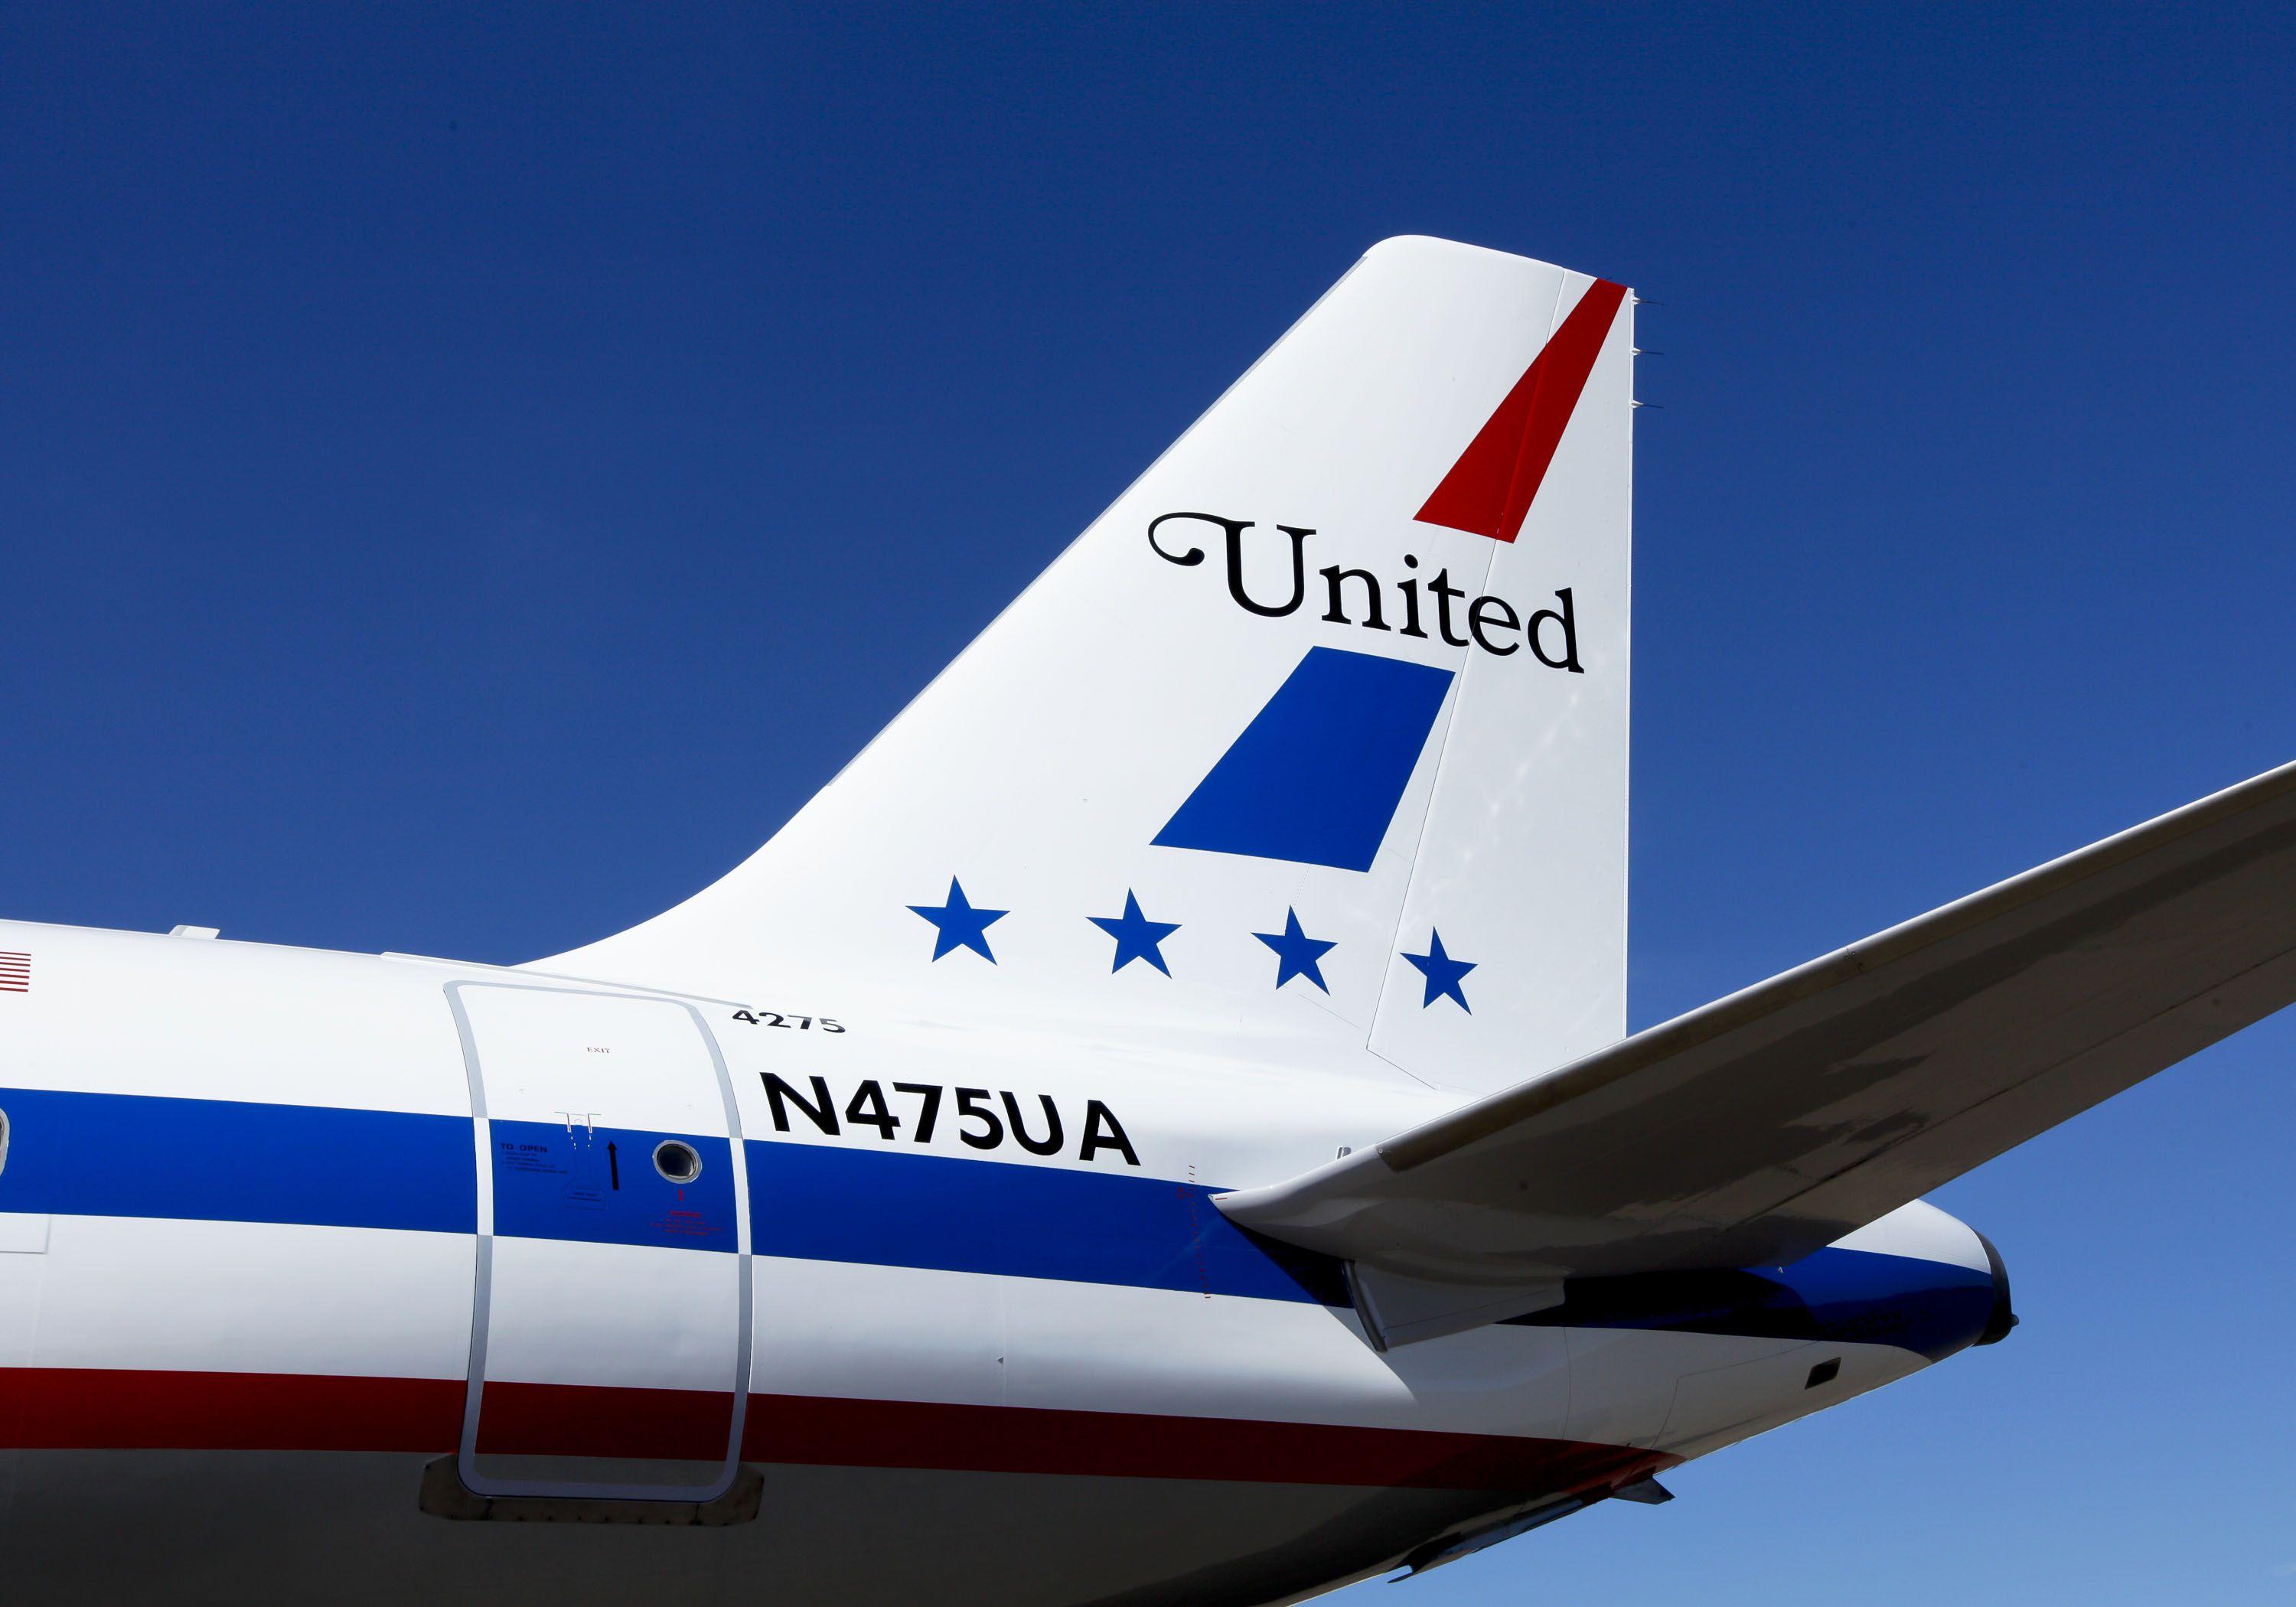 United Airlines Tail Logo - PHOTOS: United Airline's Retro Friend Ship Livery Unveiled